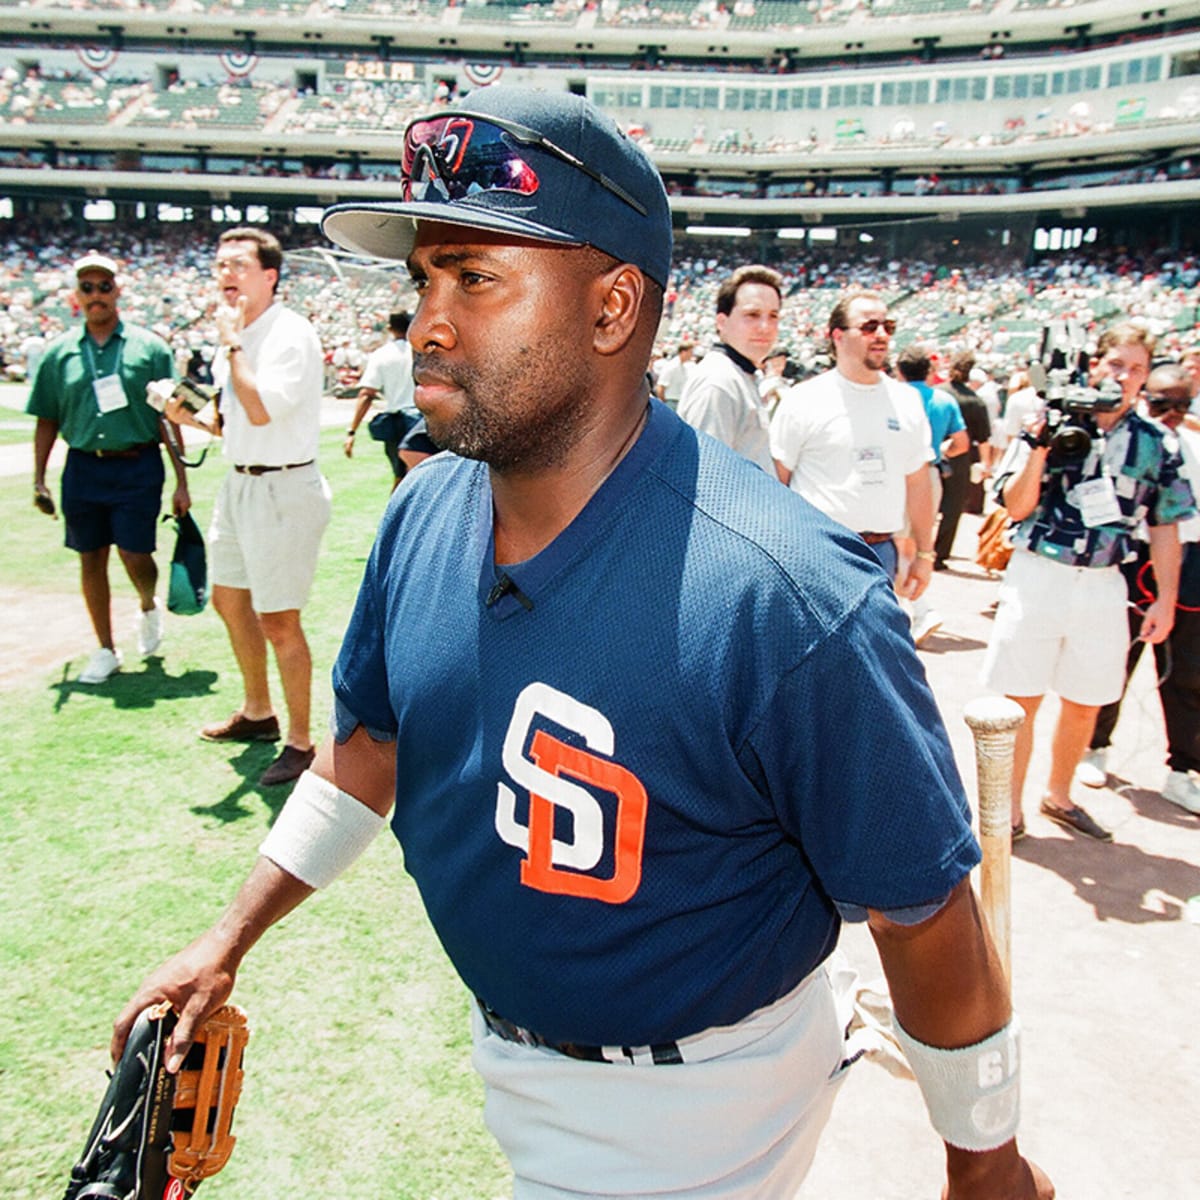 3/29 Game Thread: Giants at Padres, Tony Gwynn Opening Day - Gaslamp Ball